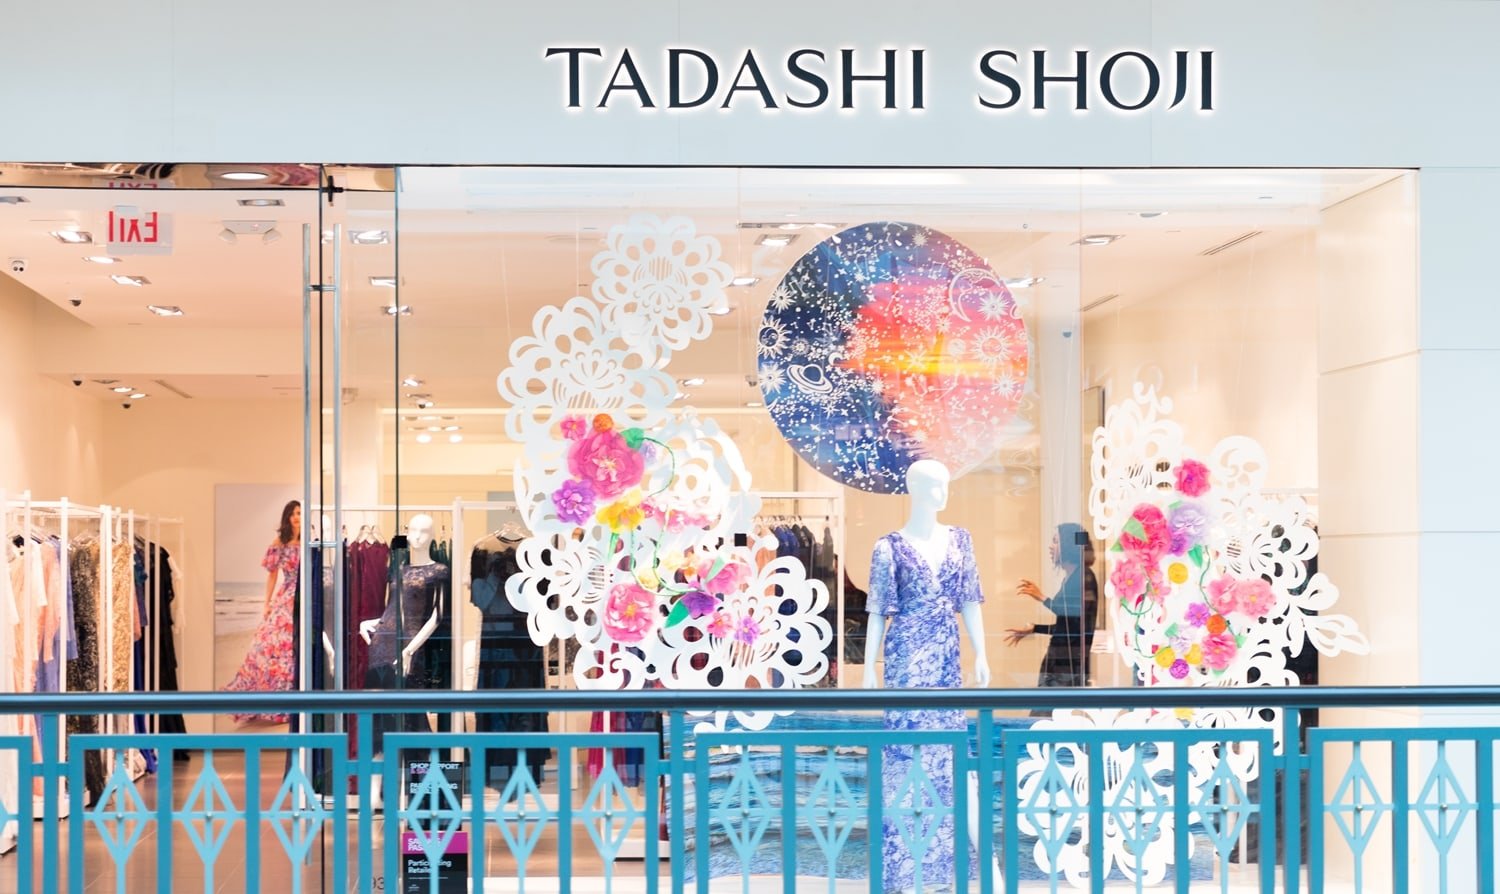 You can explore the world of Tadashi Shoji both in stores and online